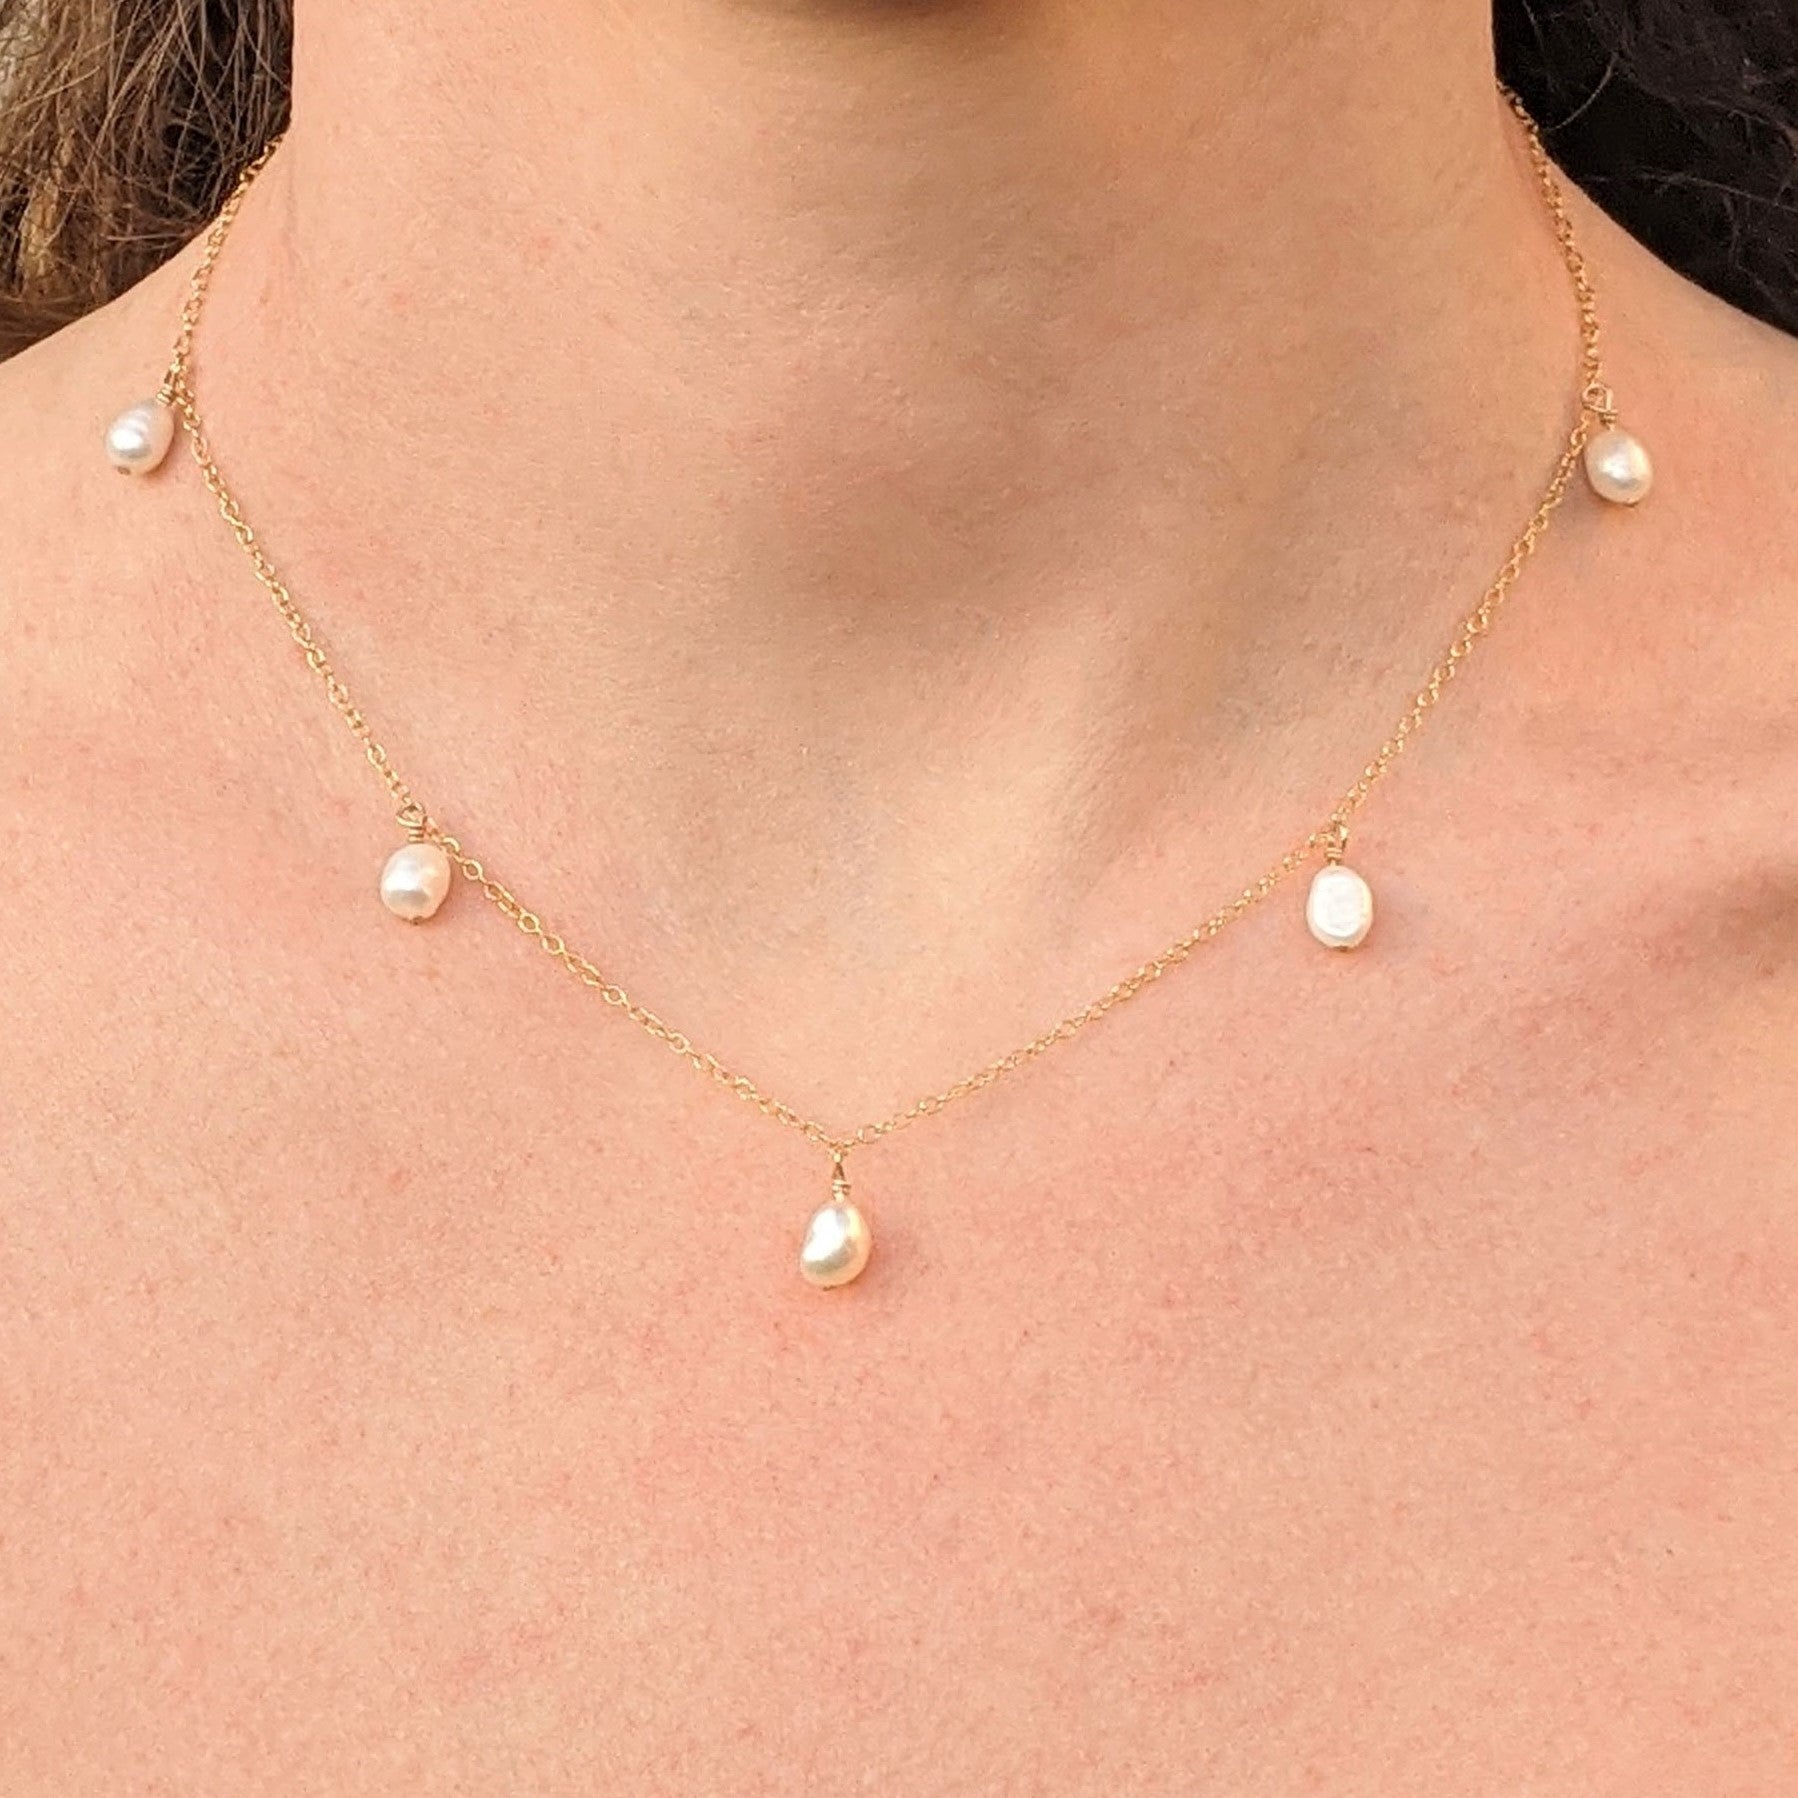 Small Baroque 5 Pearl Necklace Gold Filled British Handmade Jewellery 